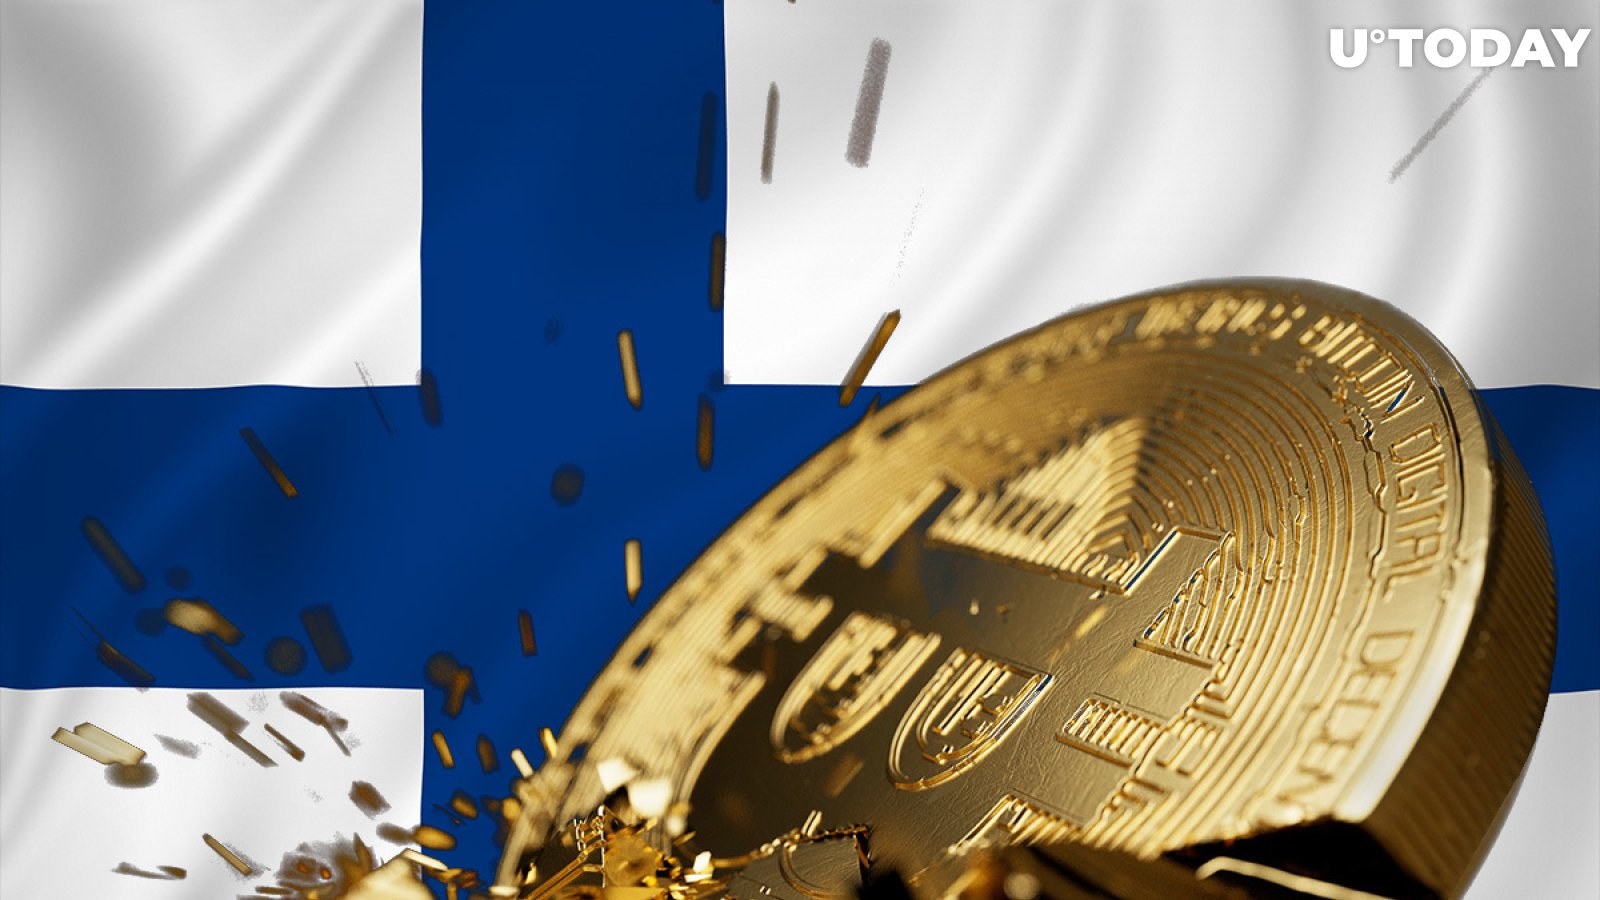 Finnish Authorities' Bitcoin Holdings Shrink by Almost €50 Million Following Crypto Crash 